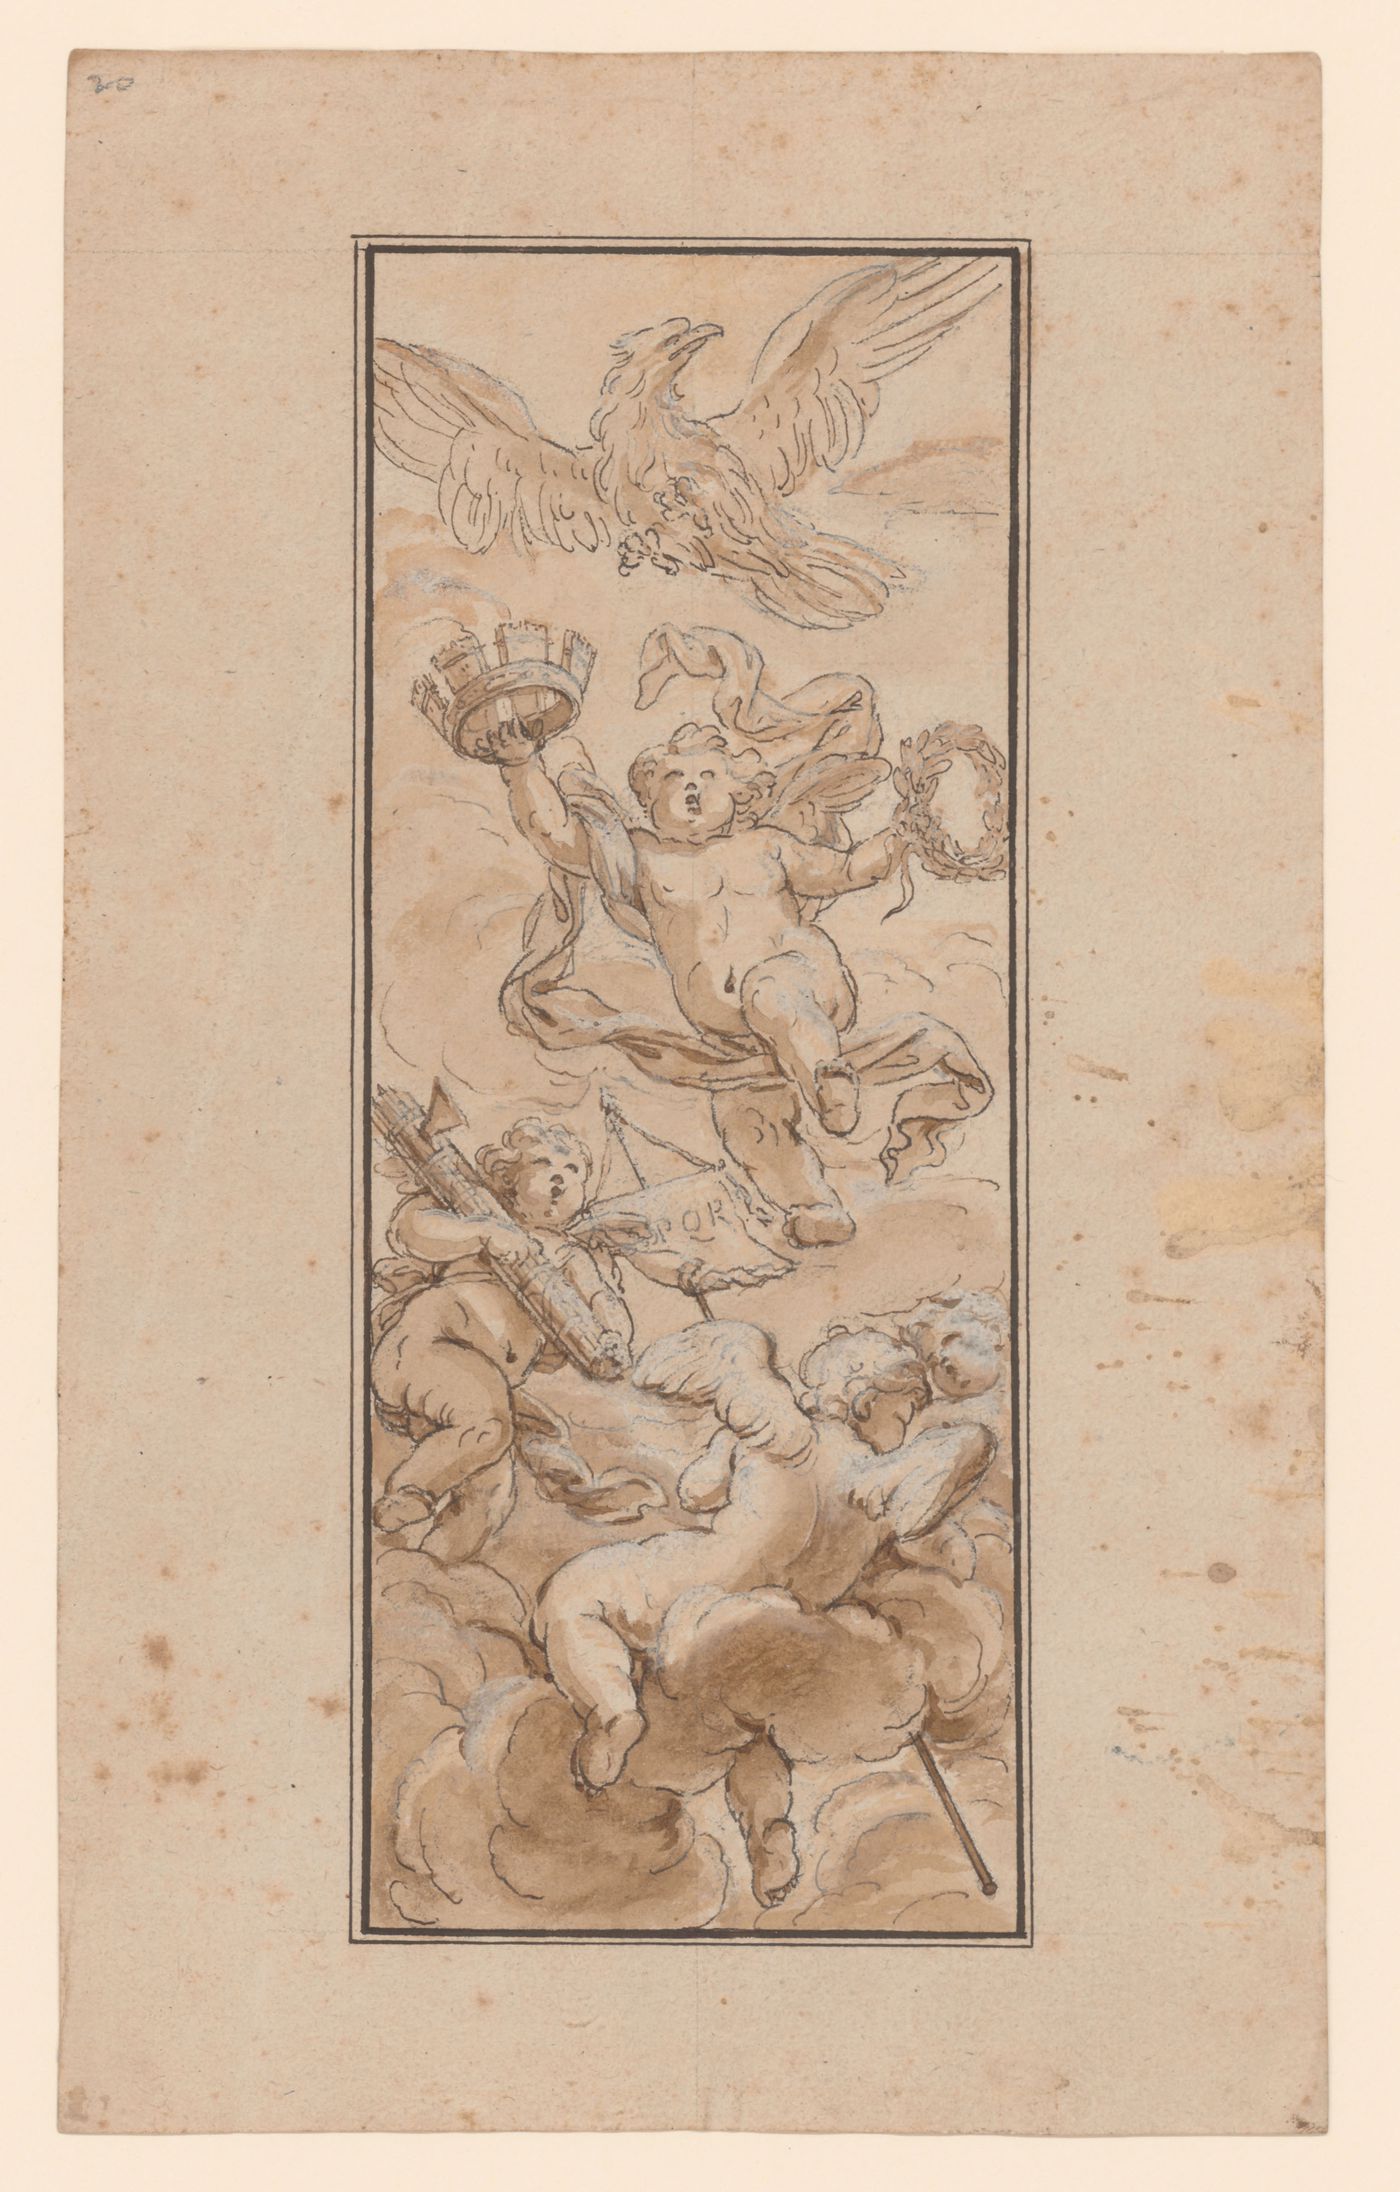 Sketch for a decorated ceiling showing putti with symbols of Rome